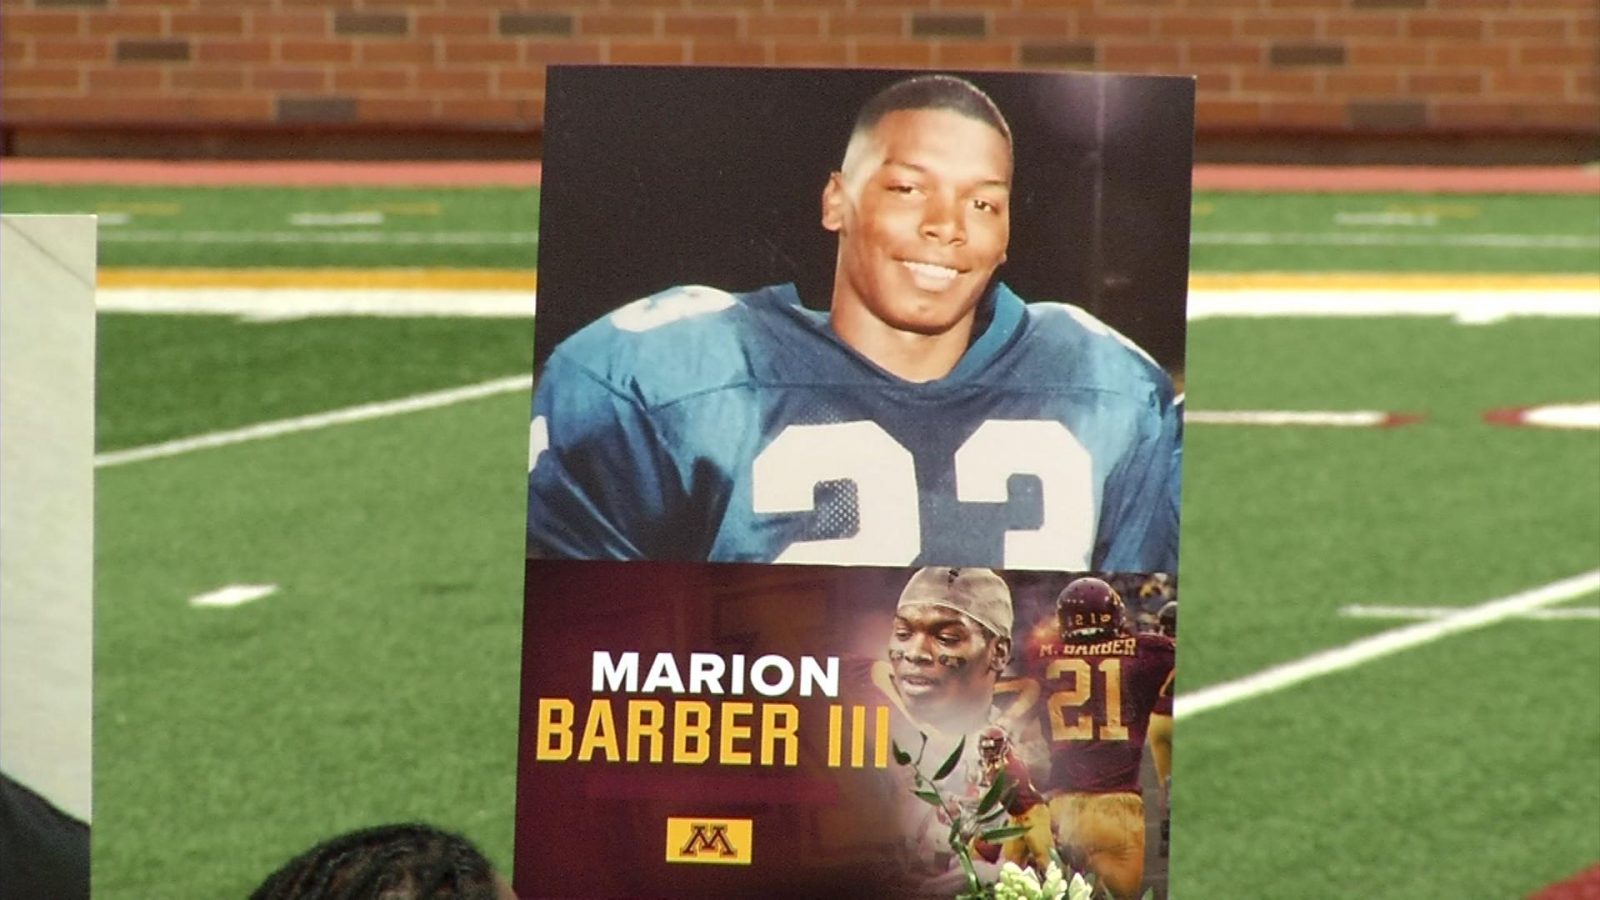 Marion Barber III Remembered at U of M - CCX Media